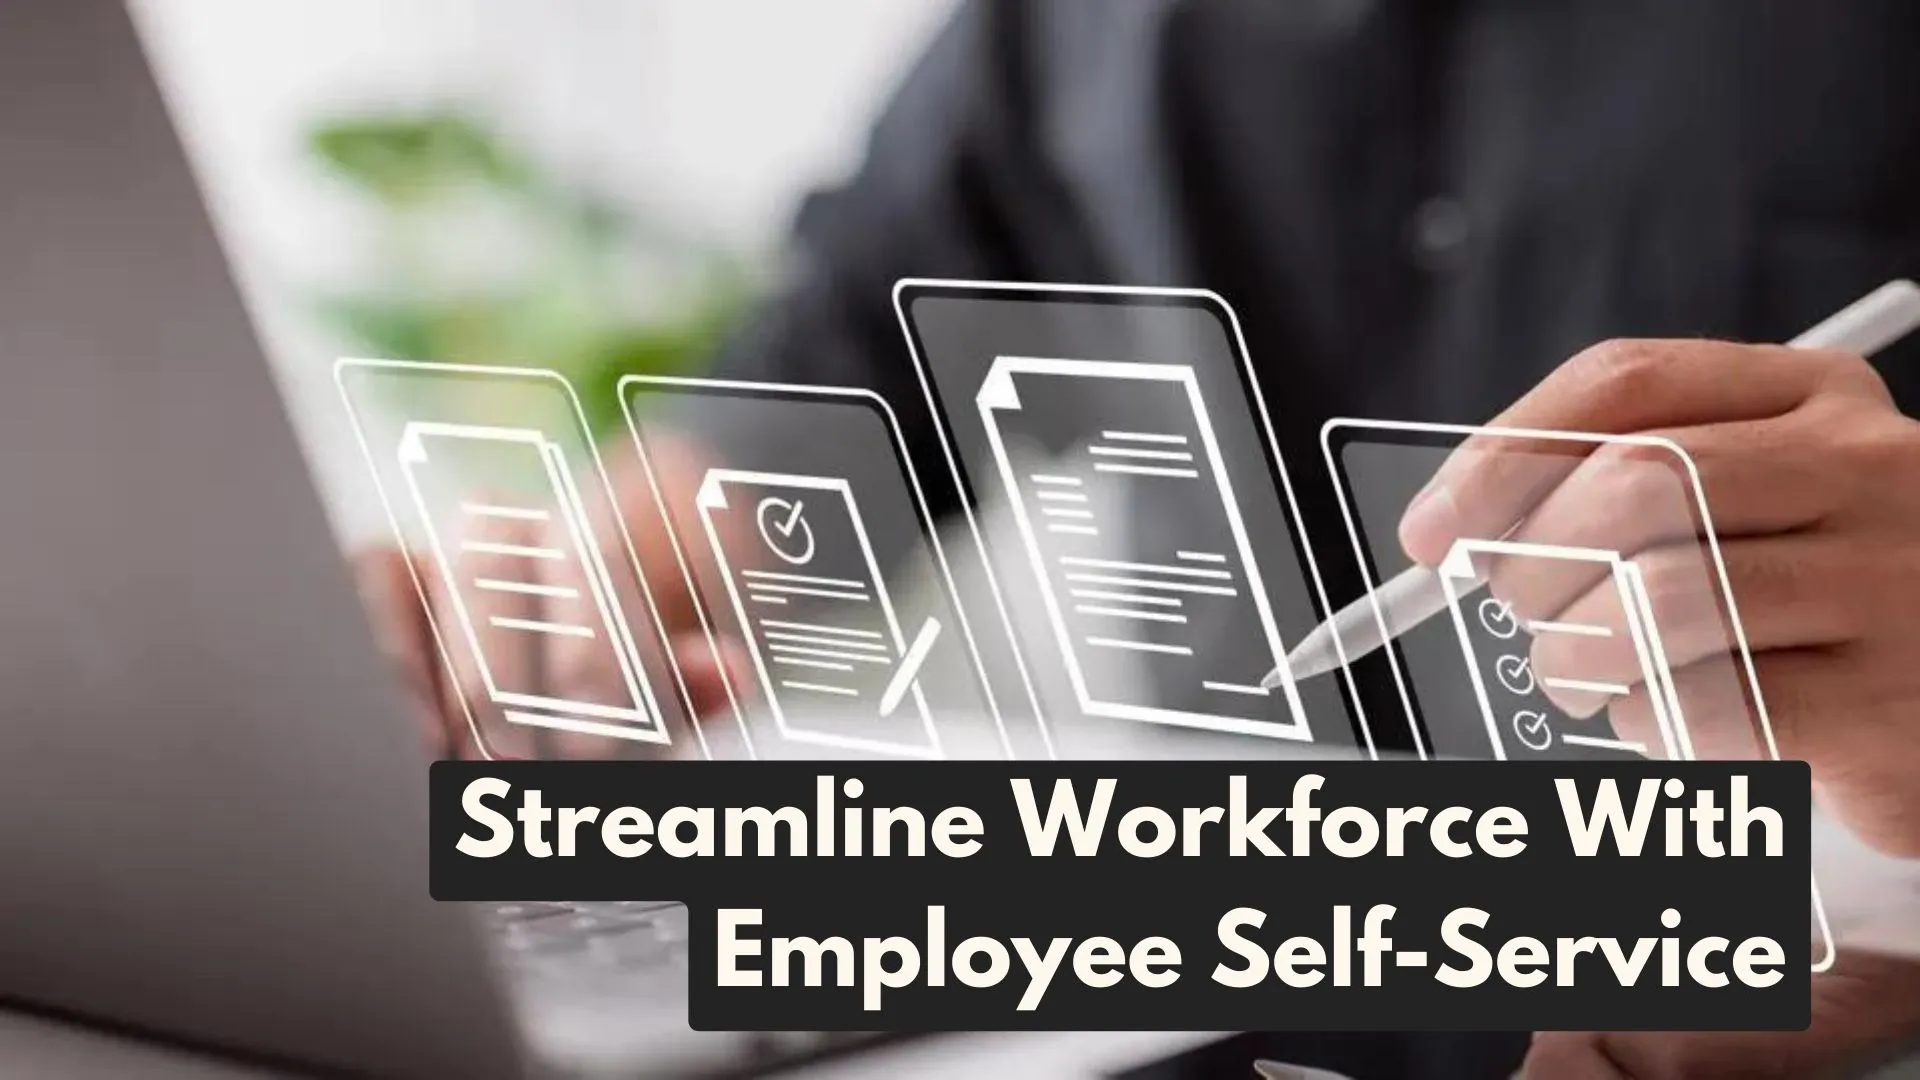 ESS : Employee Self-Services - Streamlined Workforce store Hour store-hour.com